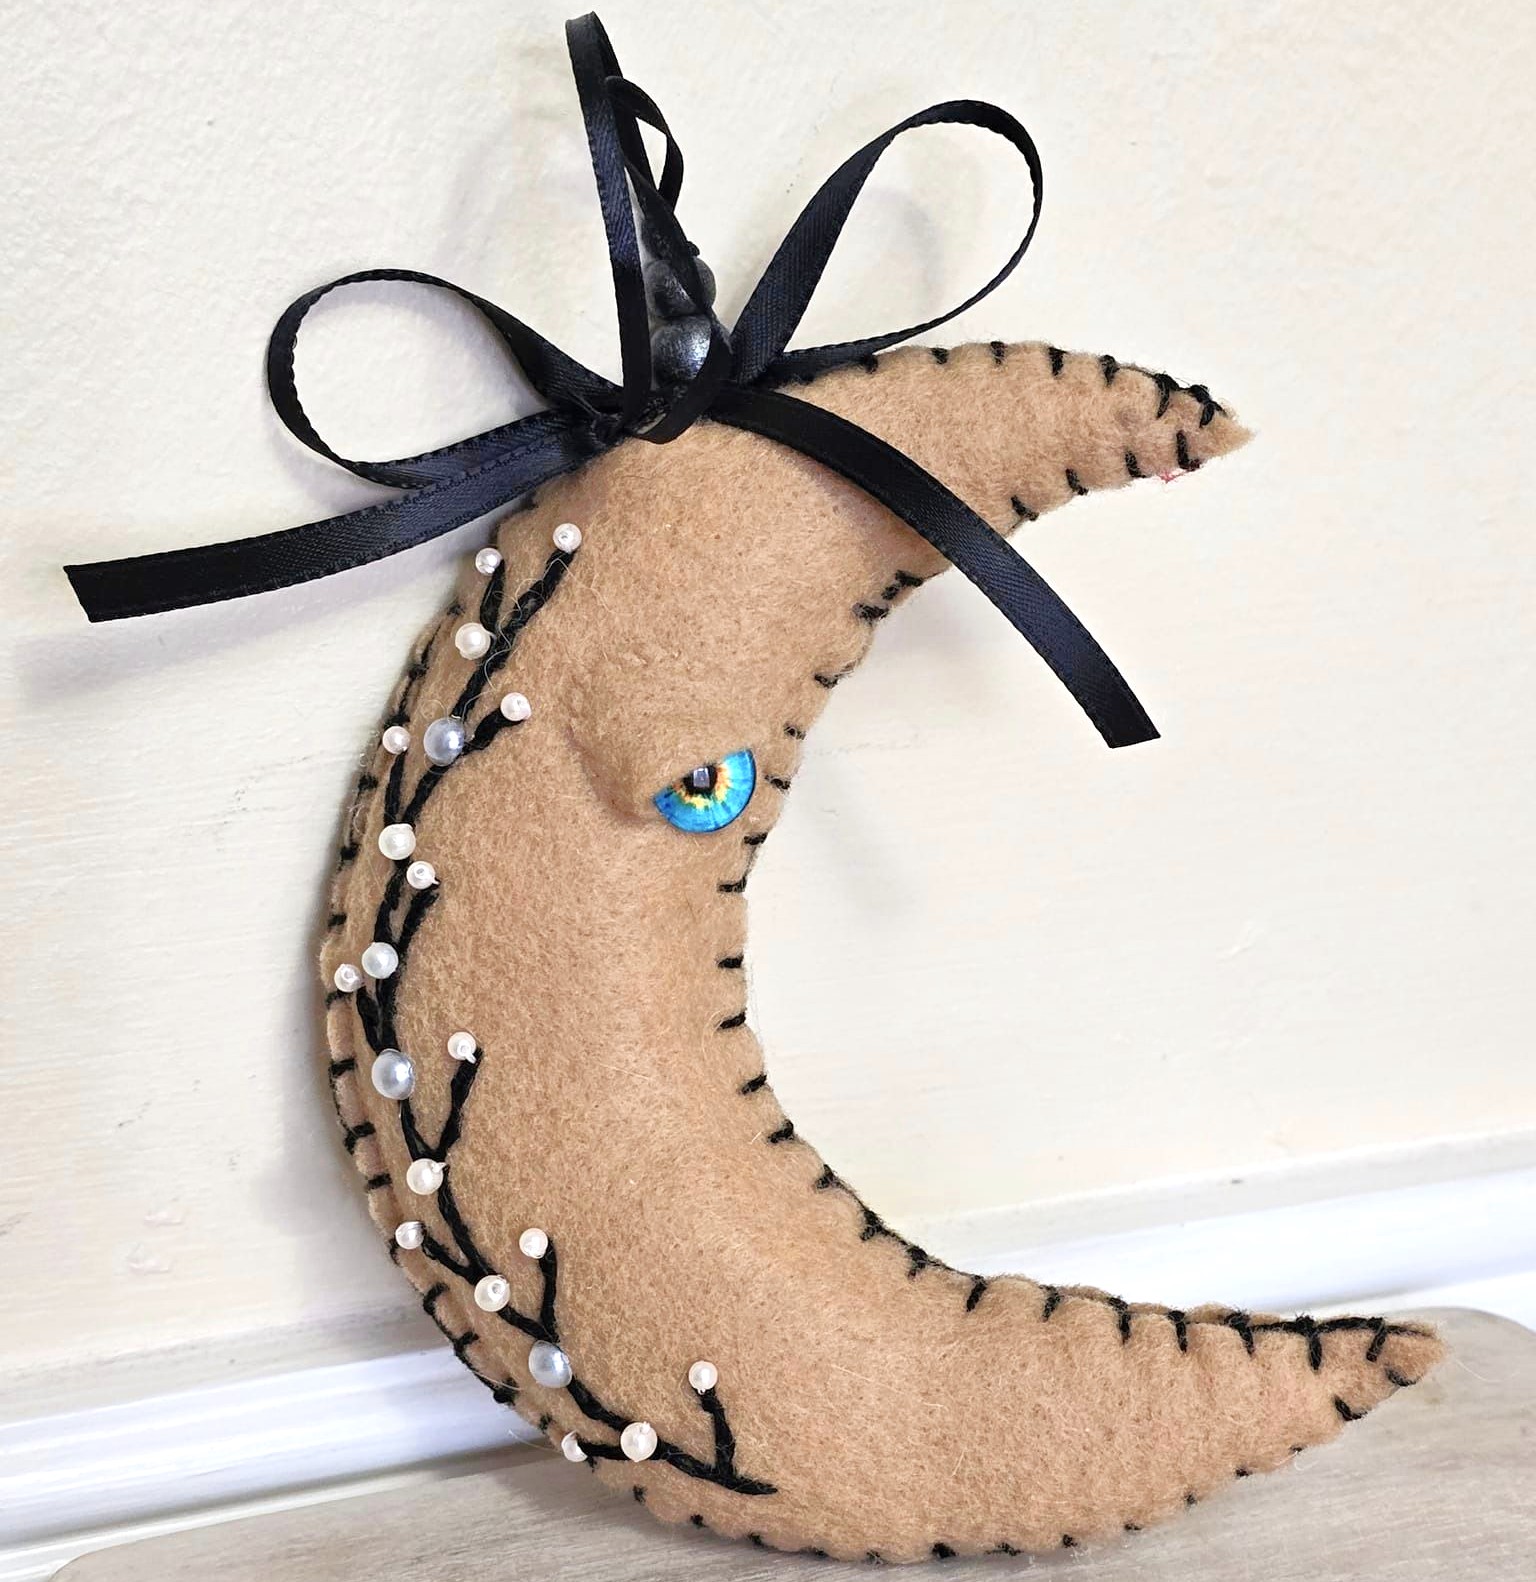 Moon ornament, beige moon with black embroidery, whimsical, handcrafted moon, felt, embroidery, bead accents